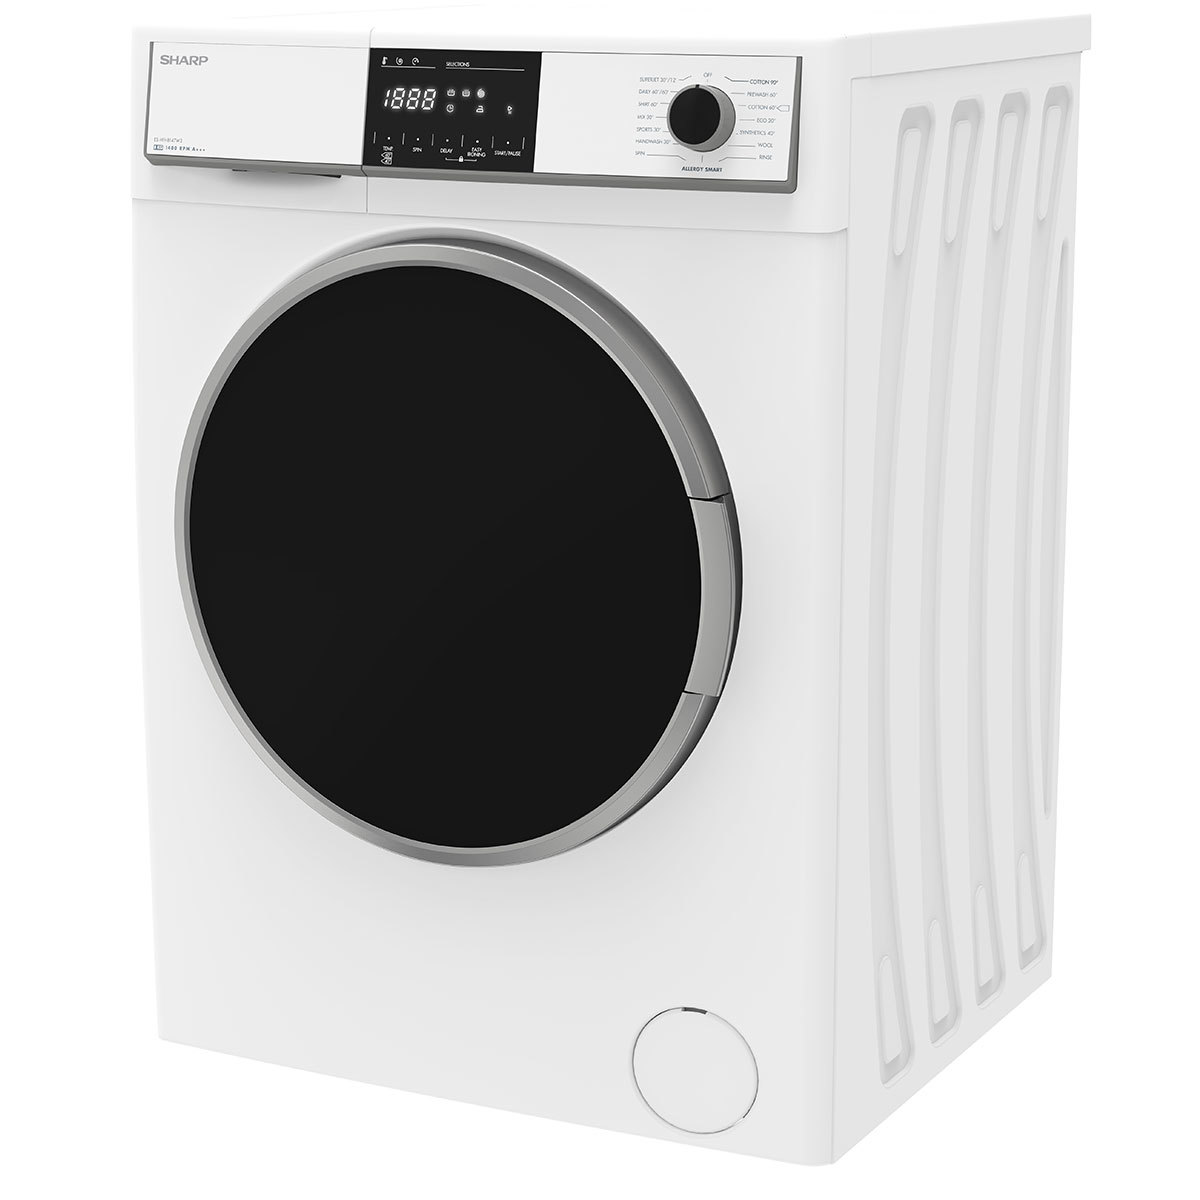 Sharp ES-HFH8147W3, 8kg, 1400rpm Washing Machine A+++ Rated in White